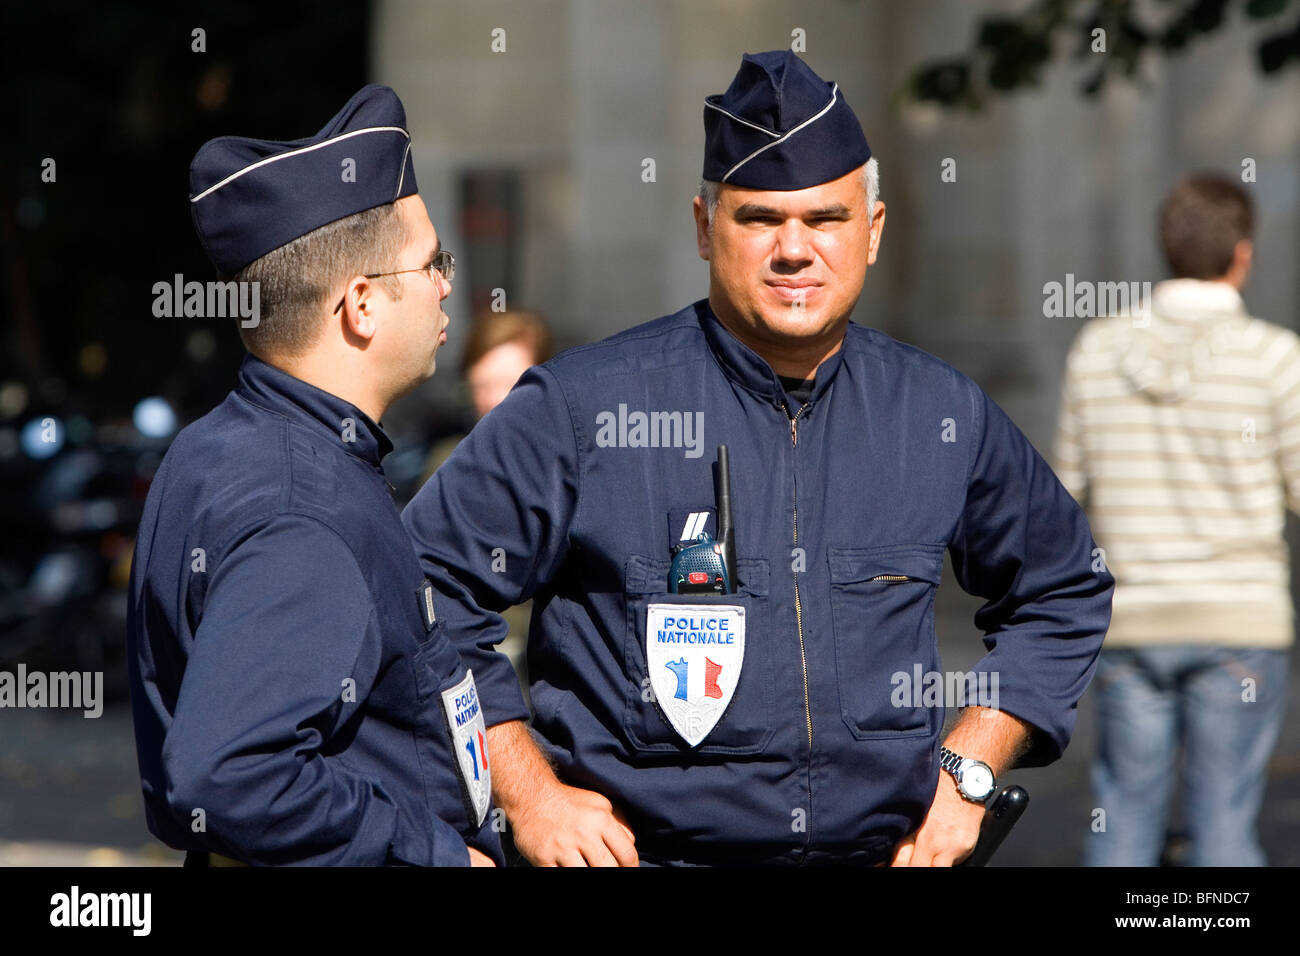 French National Police officers in Paris, France. Stock Photo